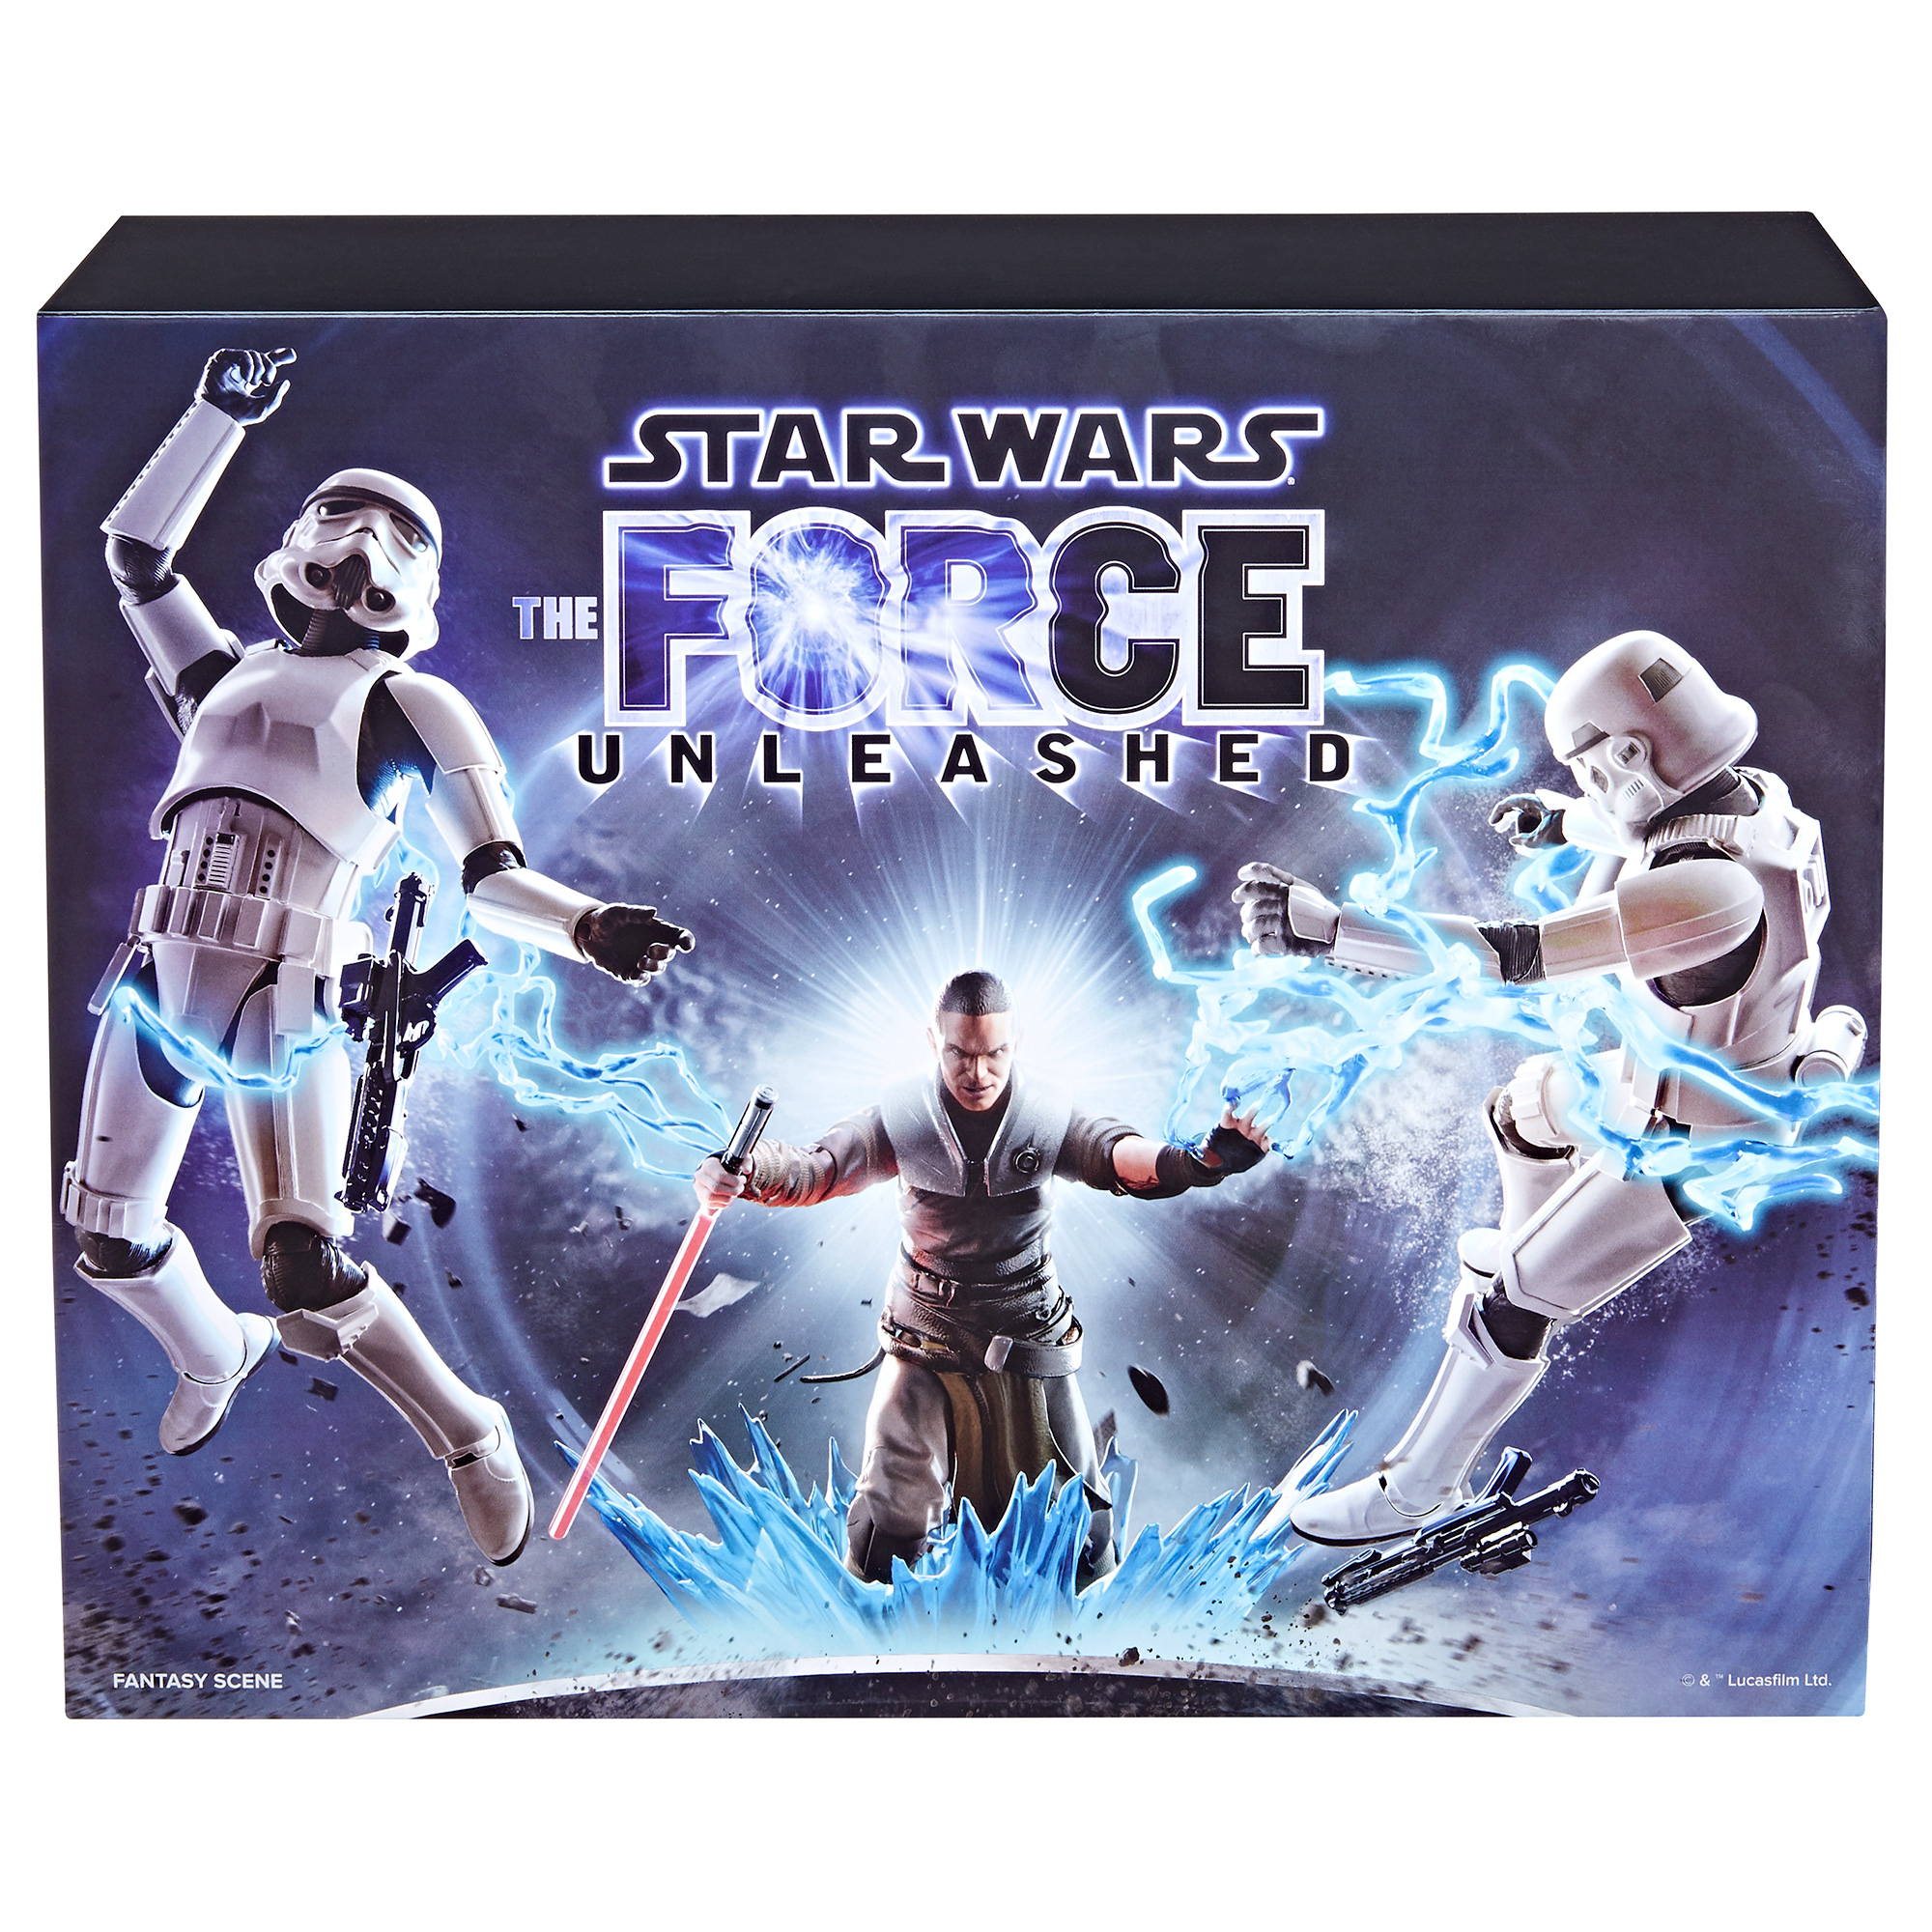 Press Release - 2023 Pulse Con Exclusive TBS 6-Inch Starkiller & Troopers The Force Unleashed Set